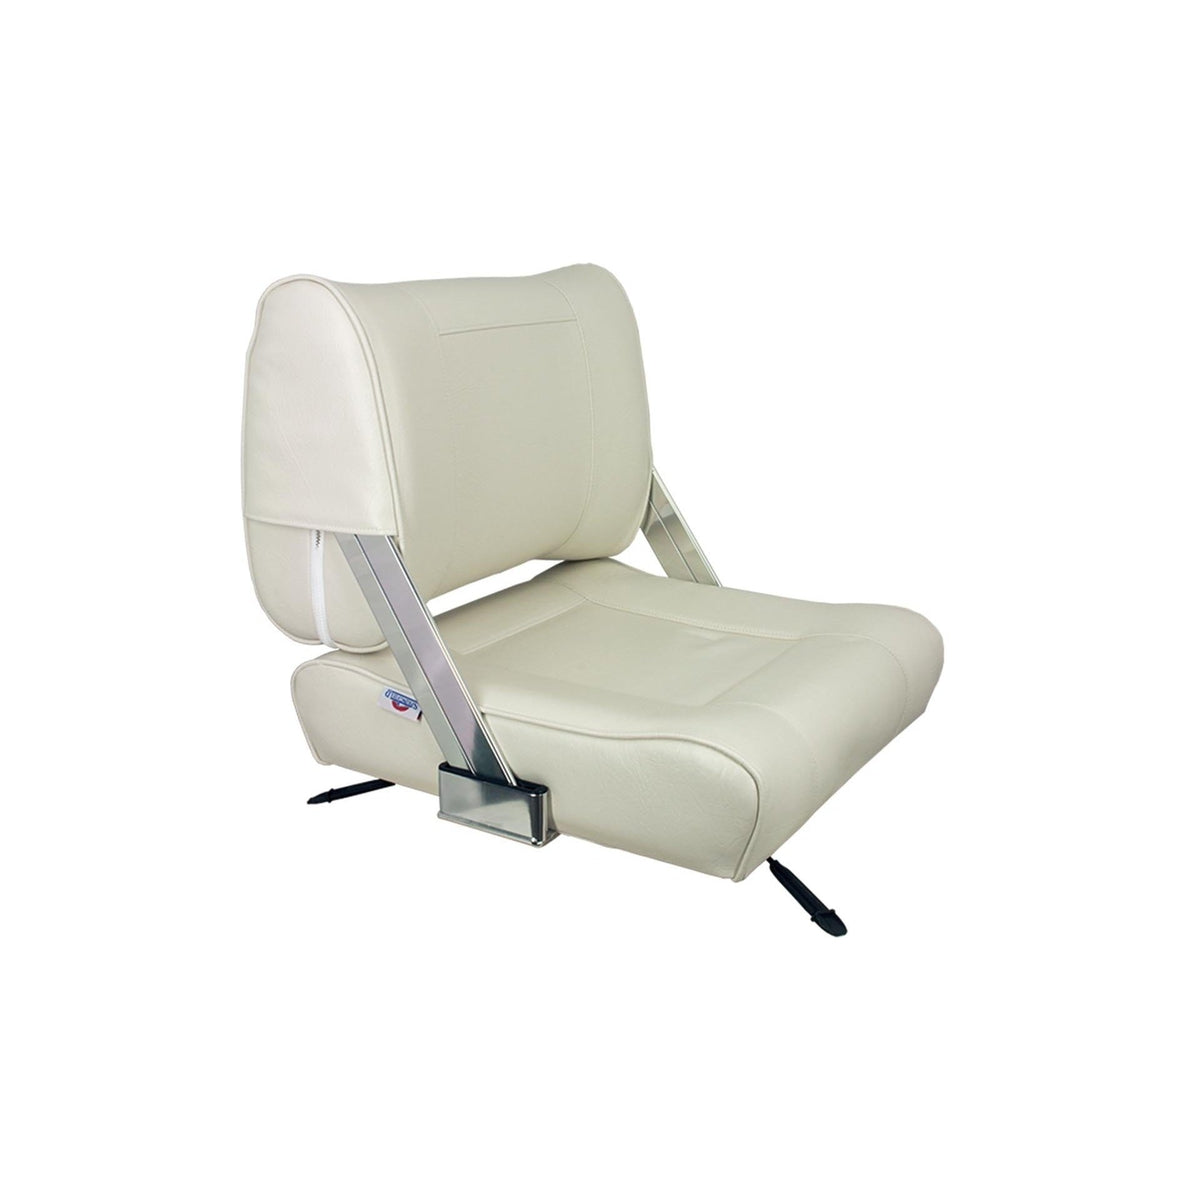 Springfield Oversized - Not Qualified for Free Shipping Springfield Flip Back Chair with Slide White #1042046